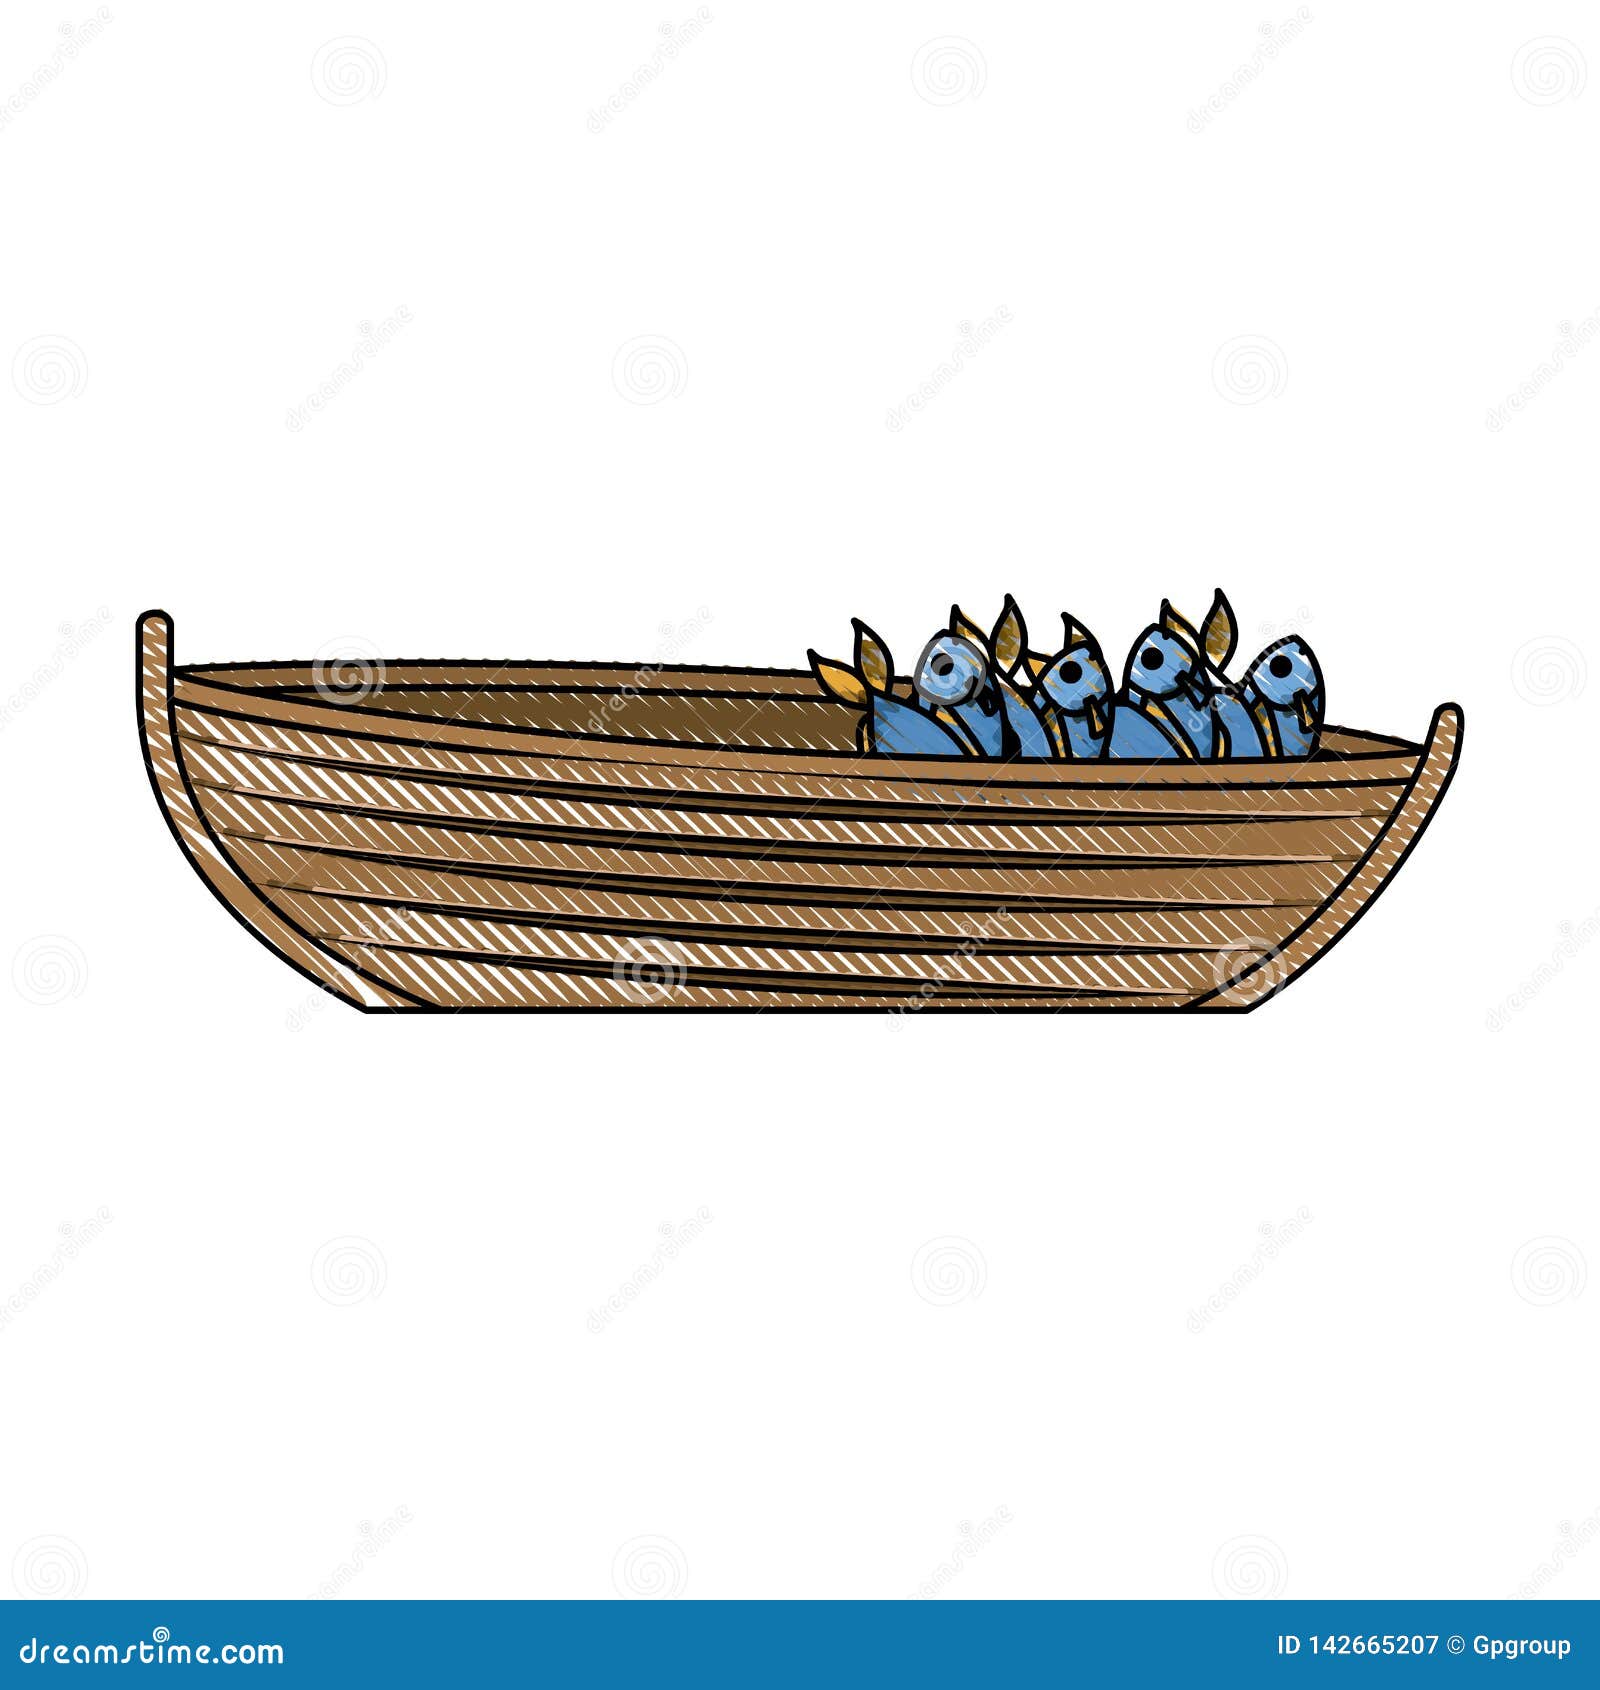 Colored Pencil Silhouette of Wooden Fishing Boat Full of Fish